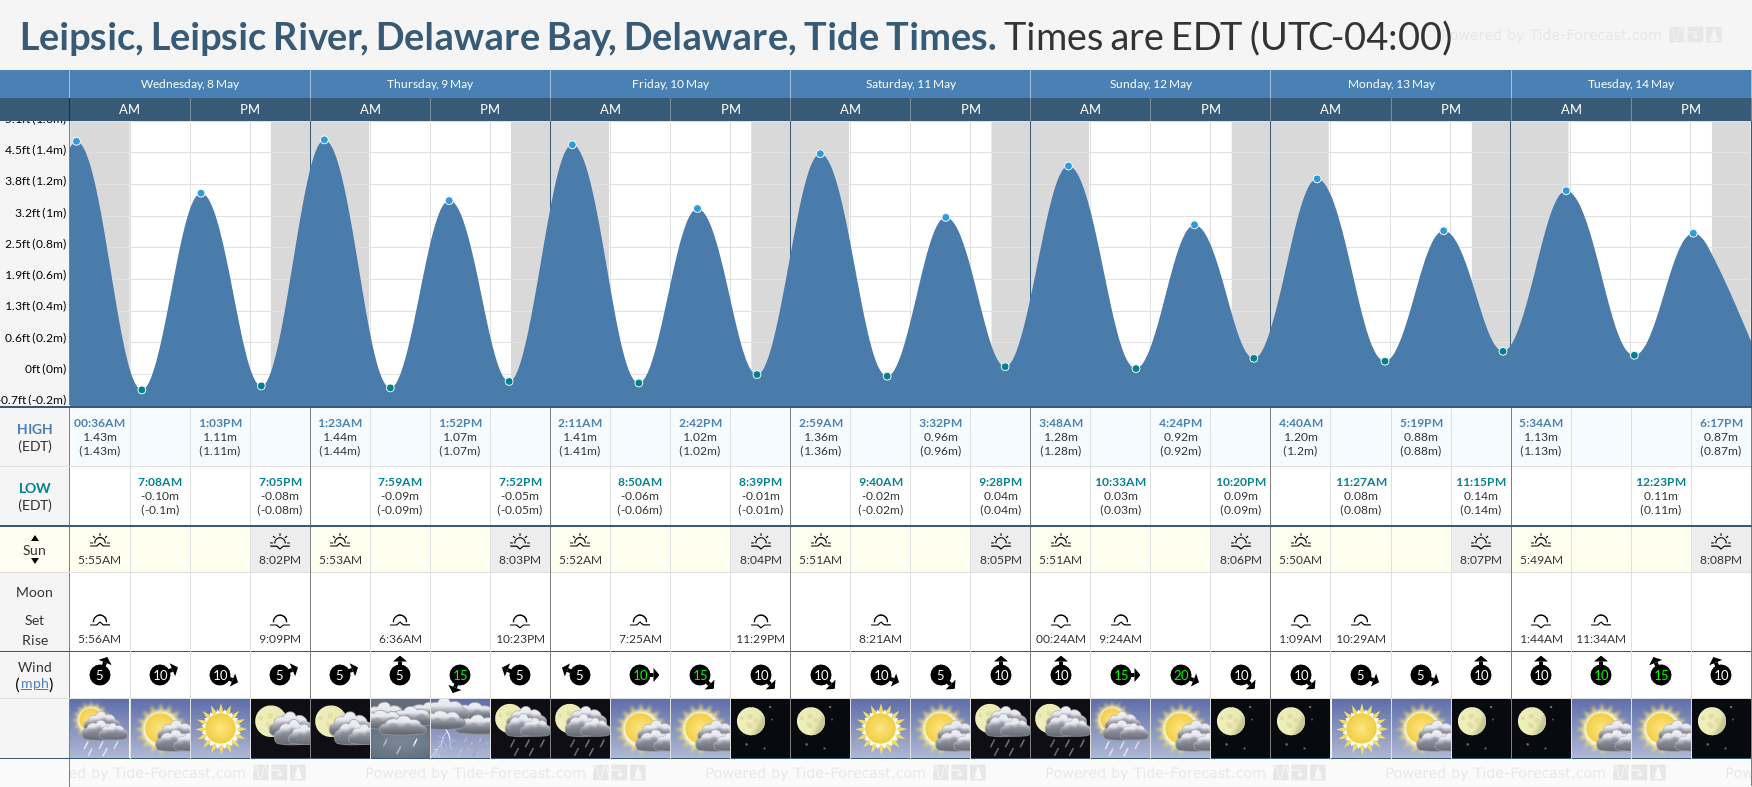 Leipsic, Leipsic River, Delaware Bay, Delaware Tide Chart including high and low tide tide times for the next 7 days